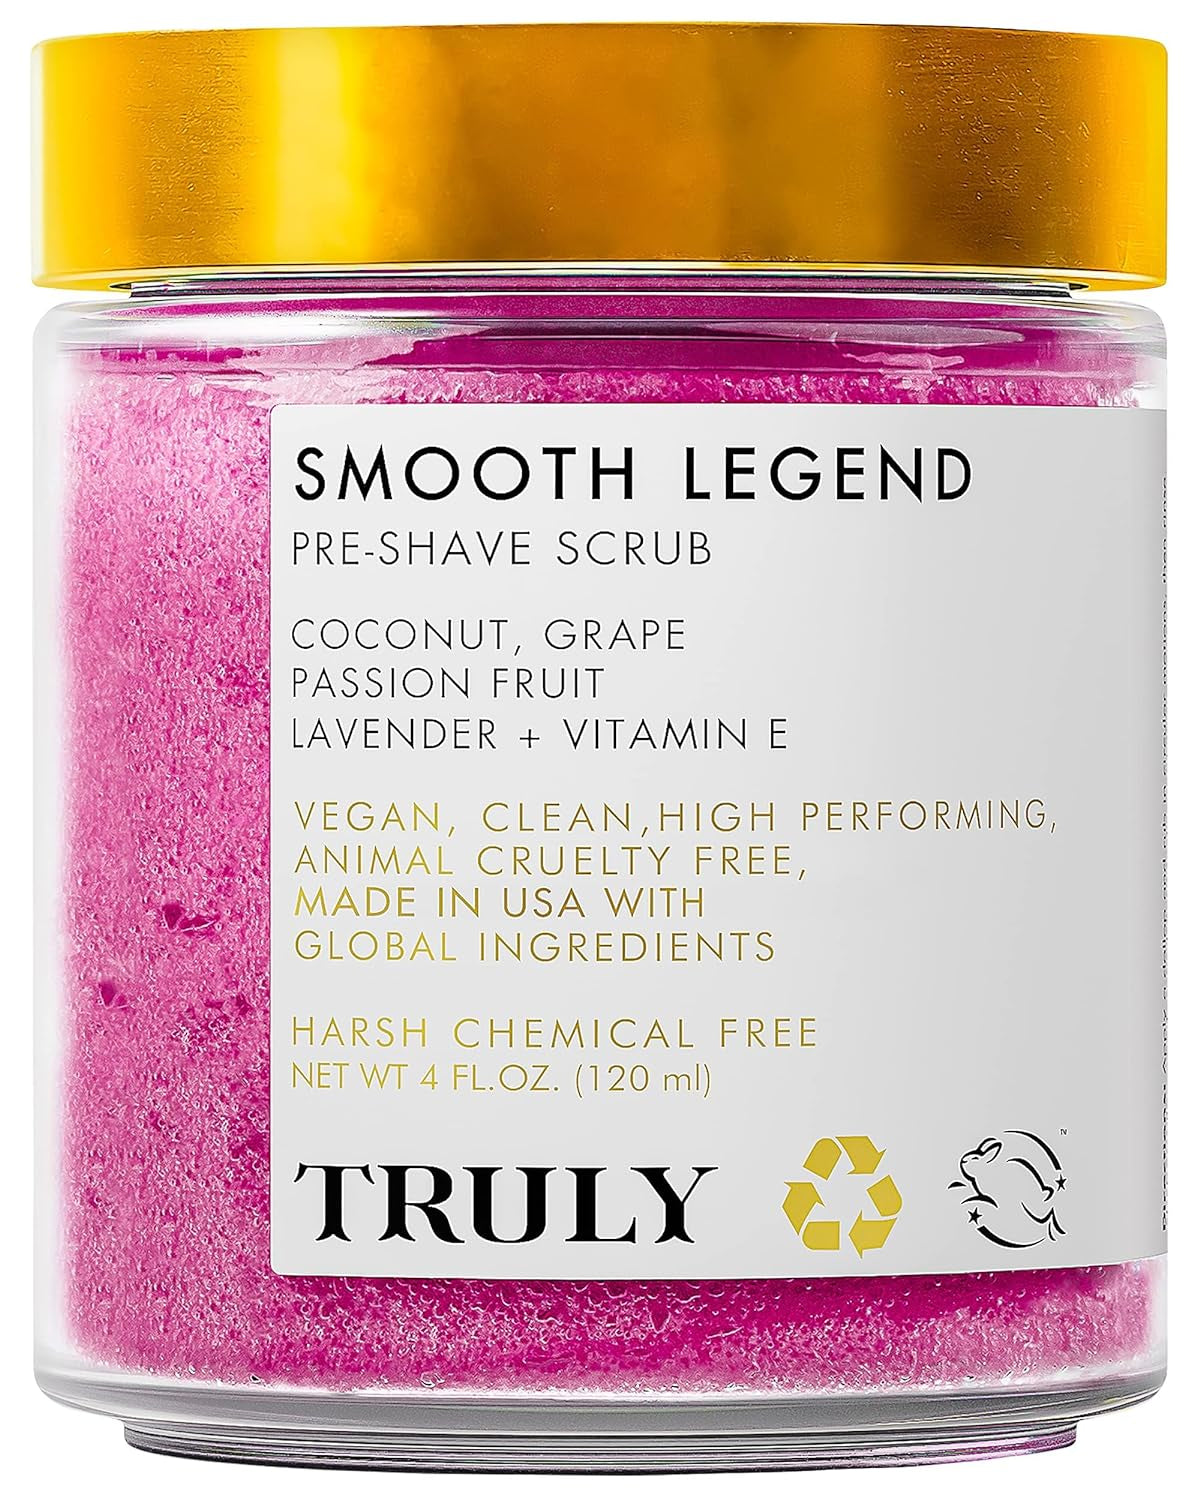 "Truly Beauty Matcha Whipped Face Scrub with Green Tea, Vitamin A, Sea Salt, and Sugar - Natural Exfoliating Sugar Scrub for Body and Face - Minimizes Blemishes, Wrinkles, and Discoloration - 4 Fluid Ounces"